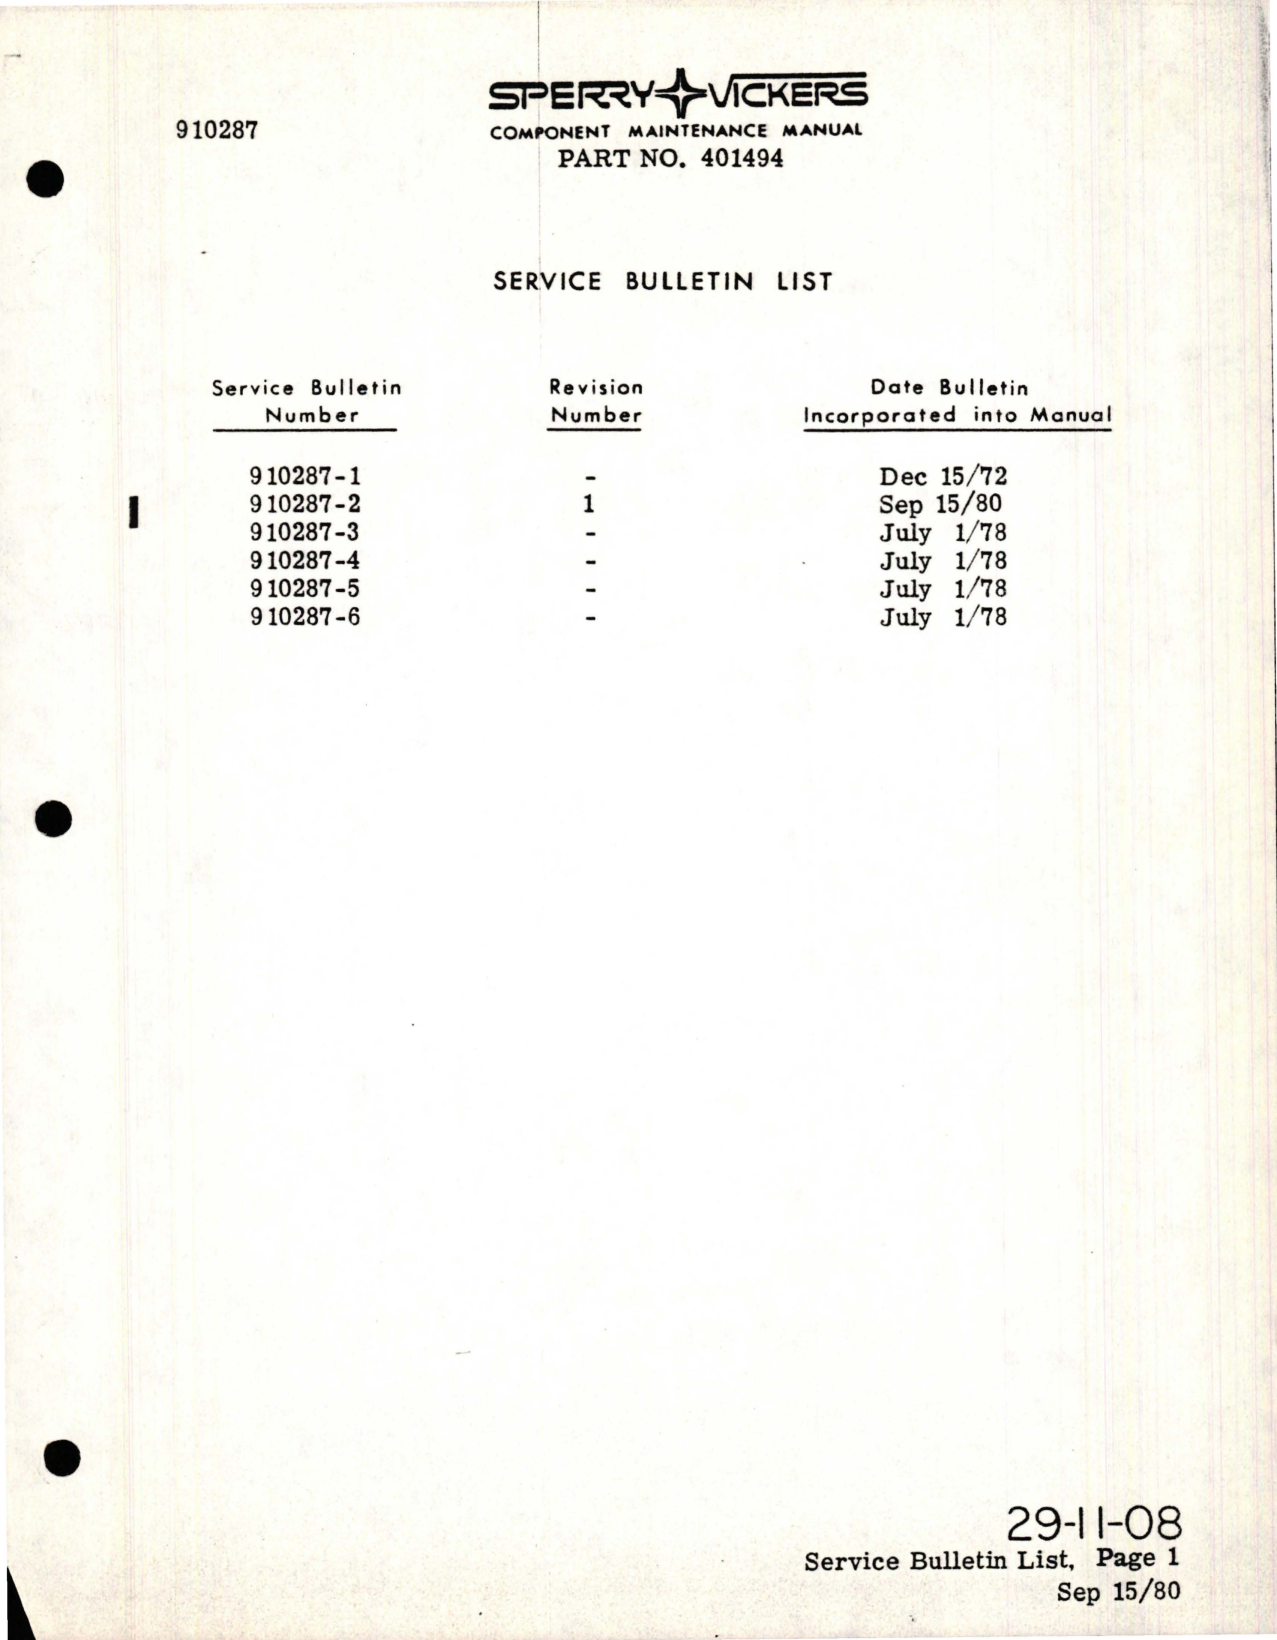 Sample page 9 from AirCorps Library document: Maintenance Manual with Illustrated Parts List for Variable Displacement Hydraulic Motorpump Assy - Model MPEV3-022-14C, MPEV3-022-14D, and MPEV3-022-14E